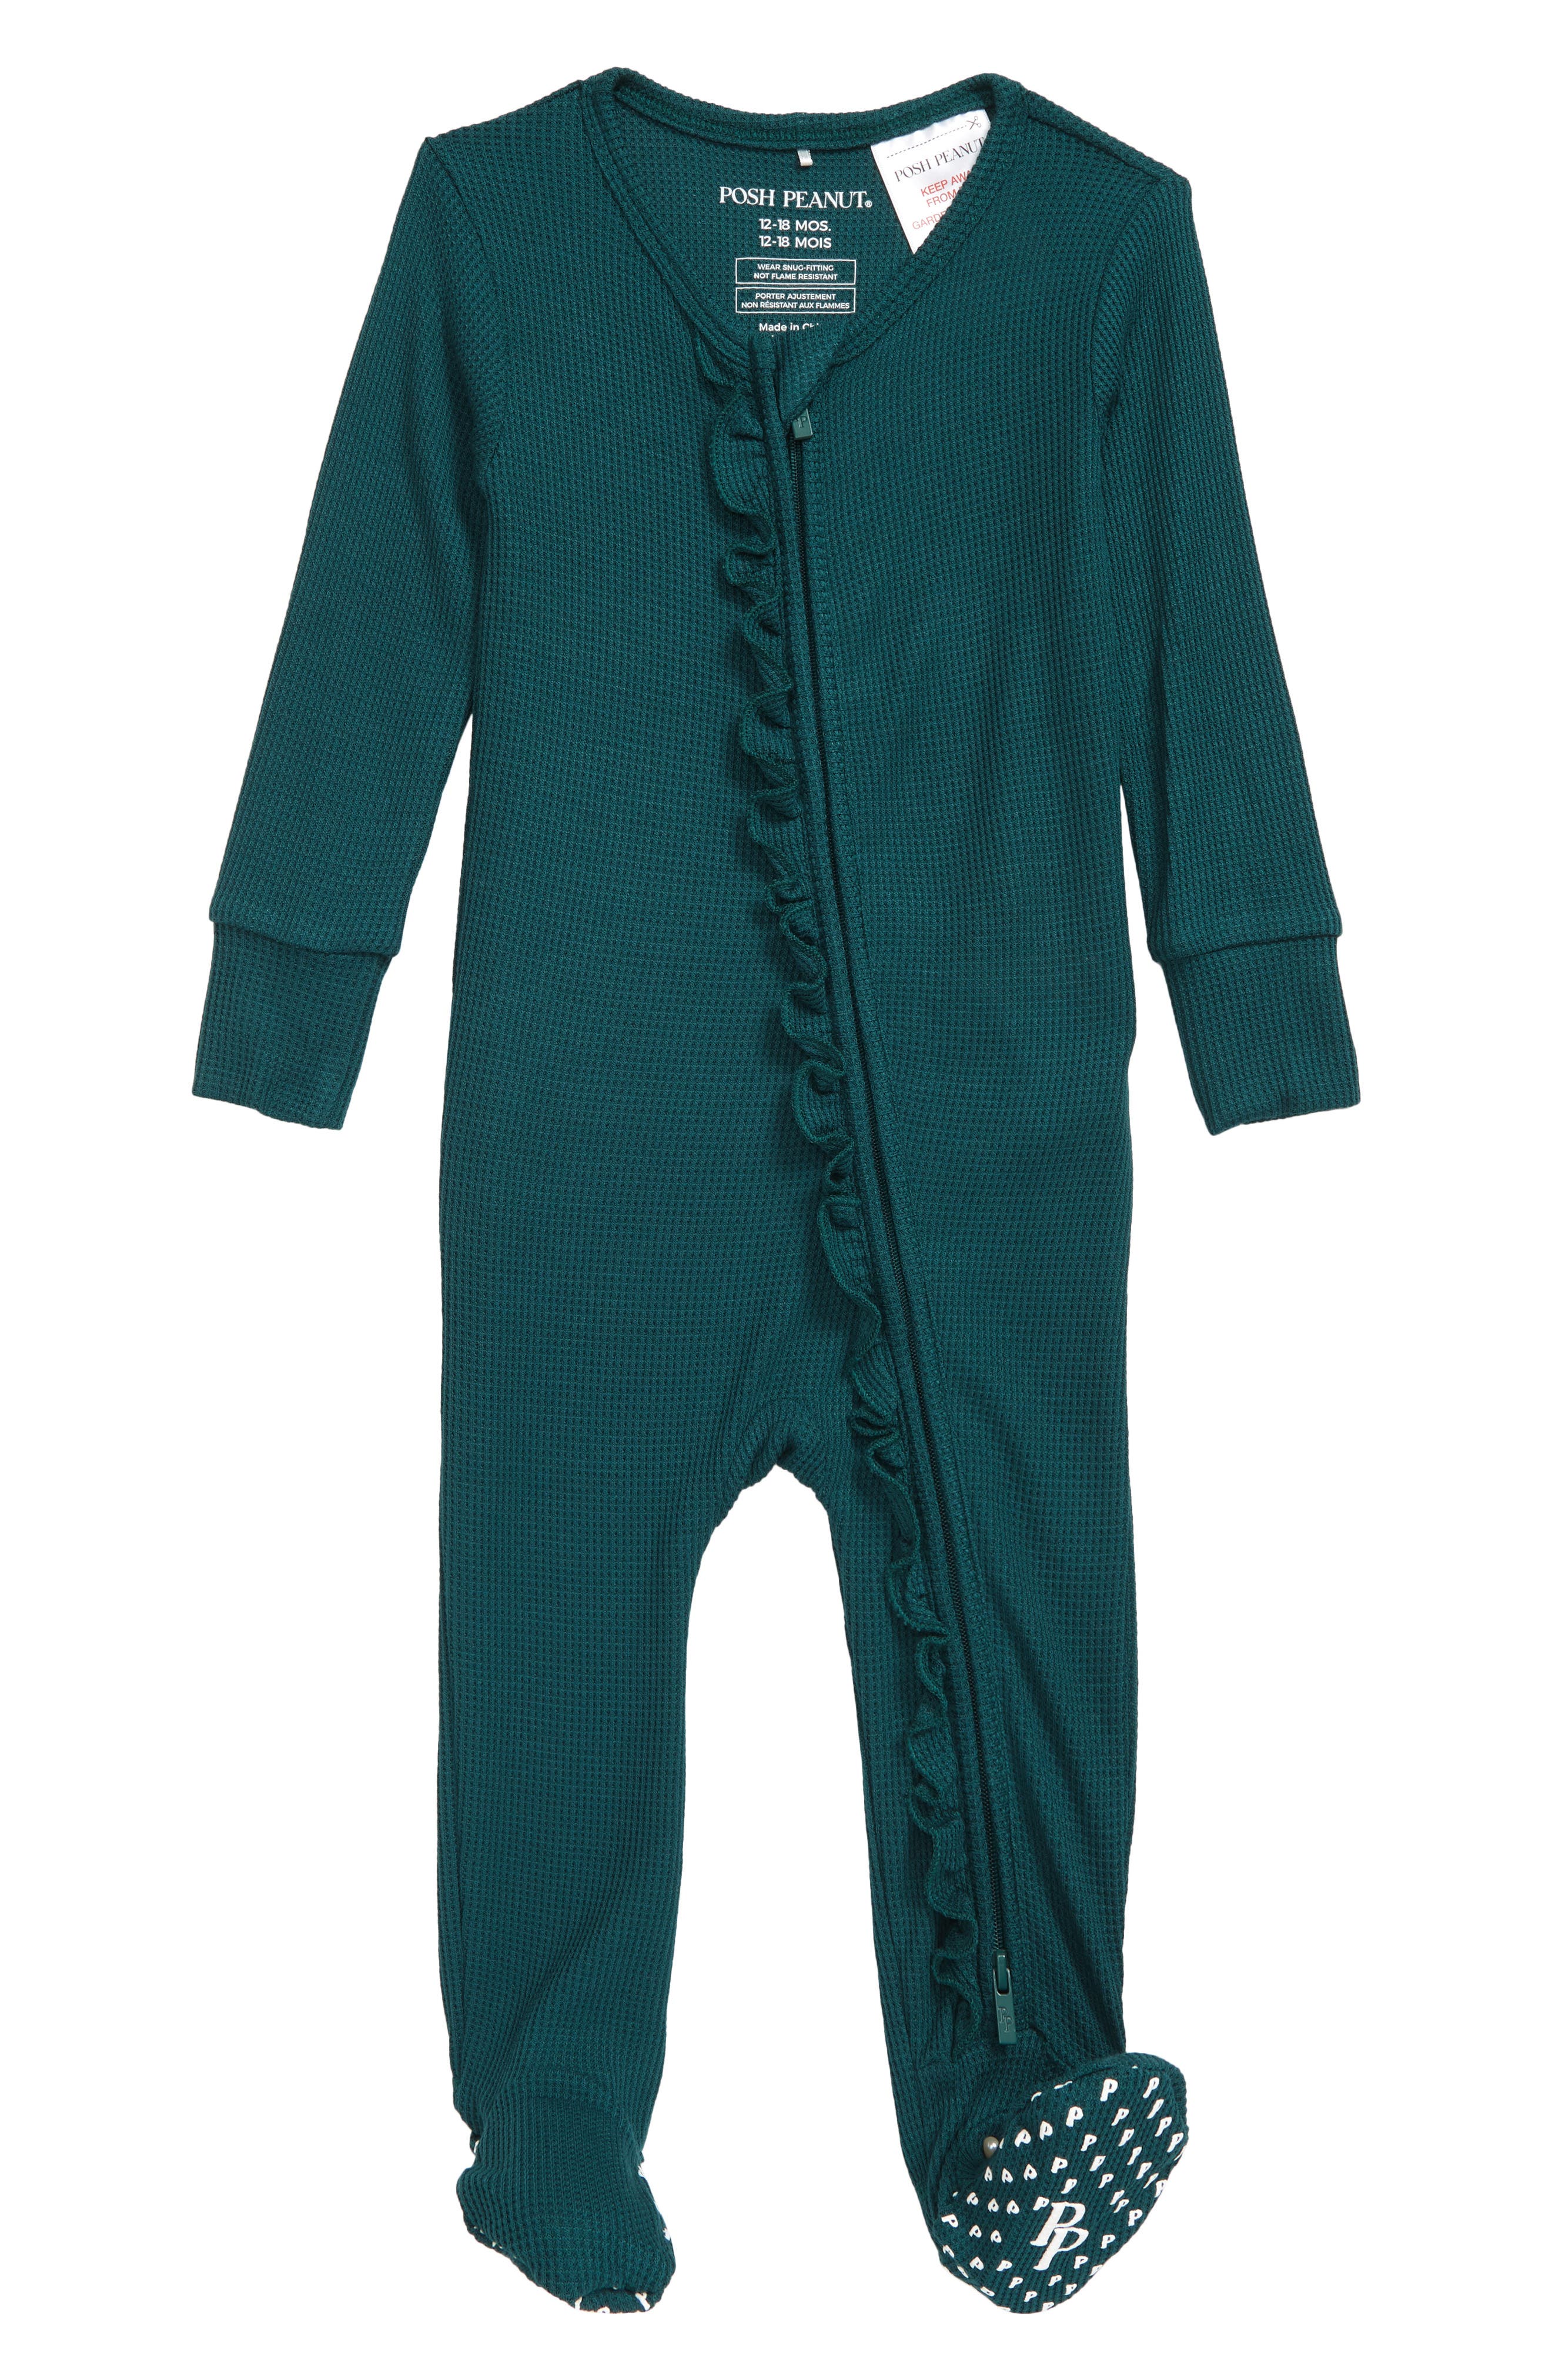 Nordstrom Baby Clothing Loungewear Pajamas Waffle Fitted Footie Pajamas in Open Green at Nordstrom 